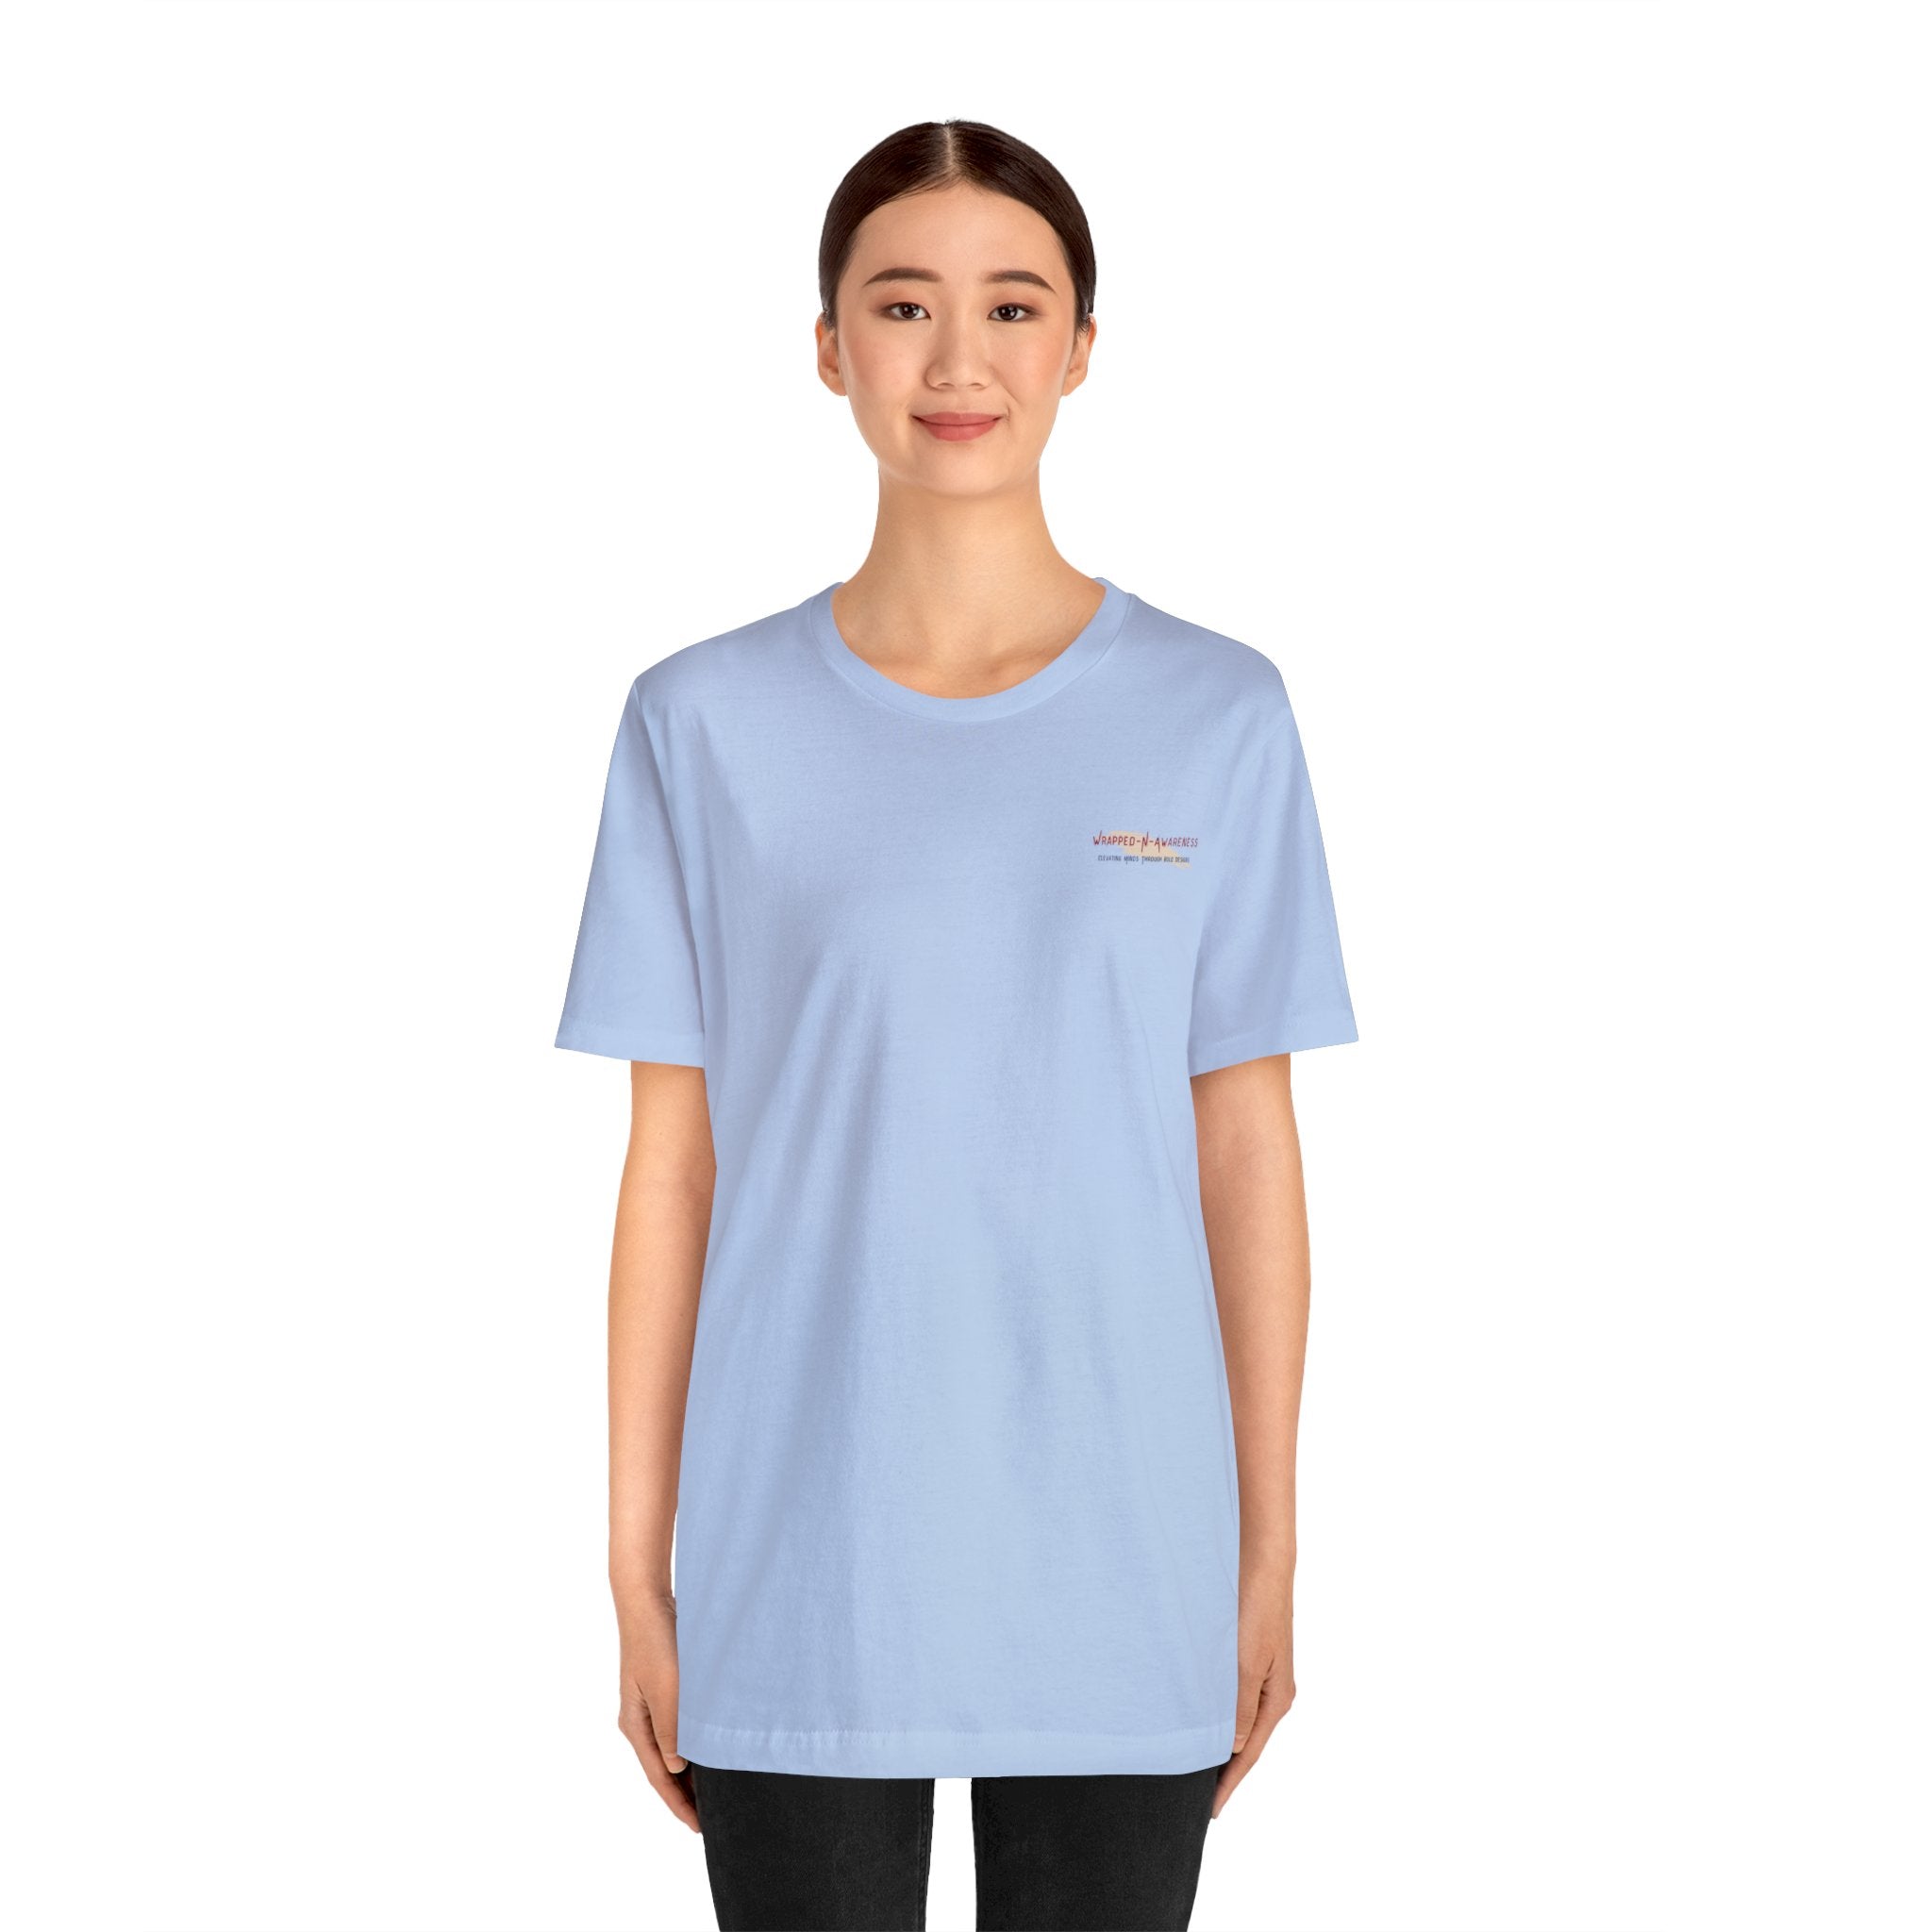 Embrace Self-Care Jersey Tee - Bella+Canvas 3001 Heather Mauve Airlume Cotton Bella+Canvas 3001 Crew Neckline Jersey Short Sleeve Lightweight Fabric Mental Health Support Retail Fit Tear-away Label Tee Unisex Tee T-Shirt 8532244910924378366_2048 Printify